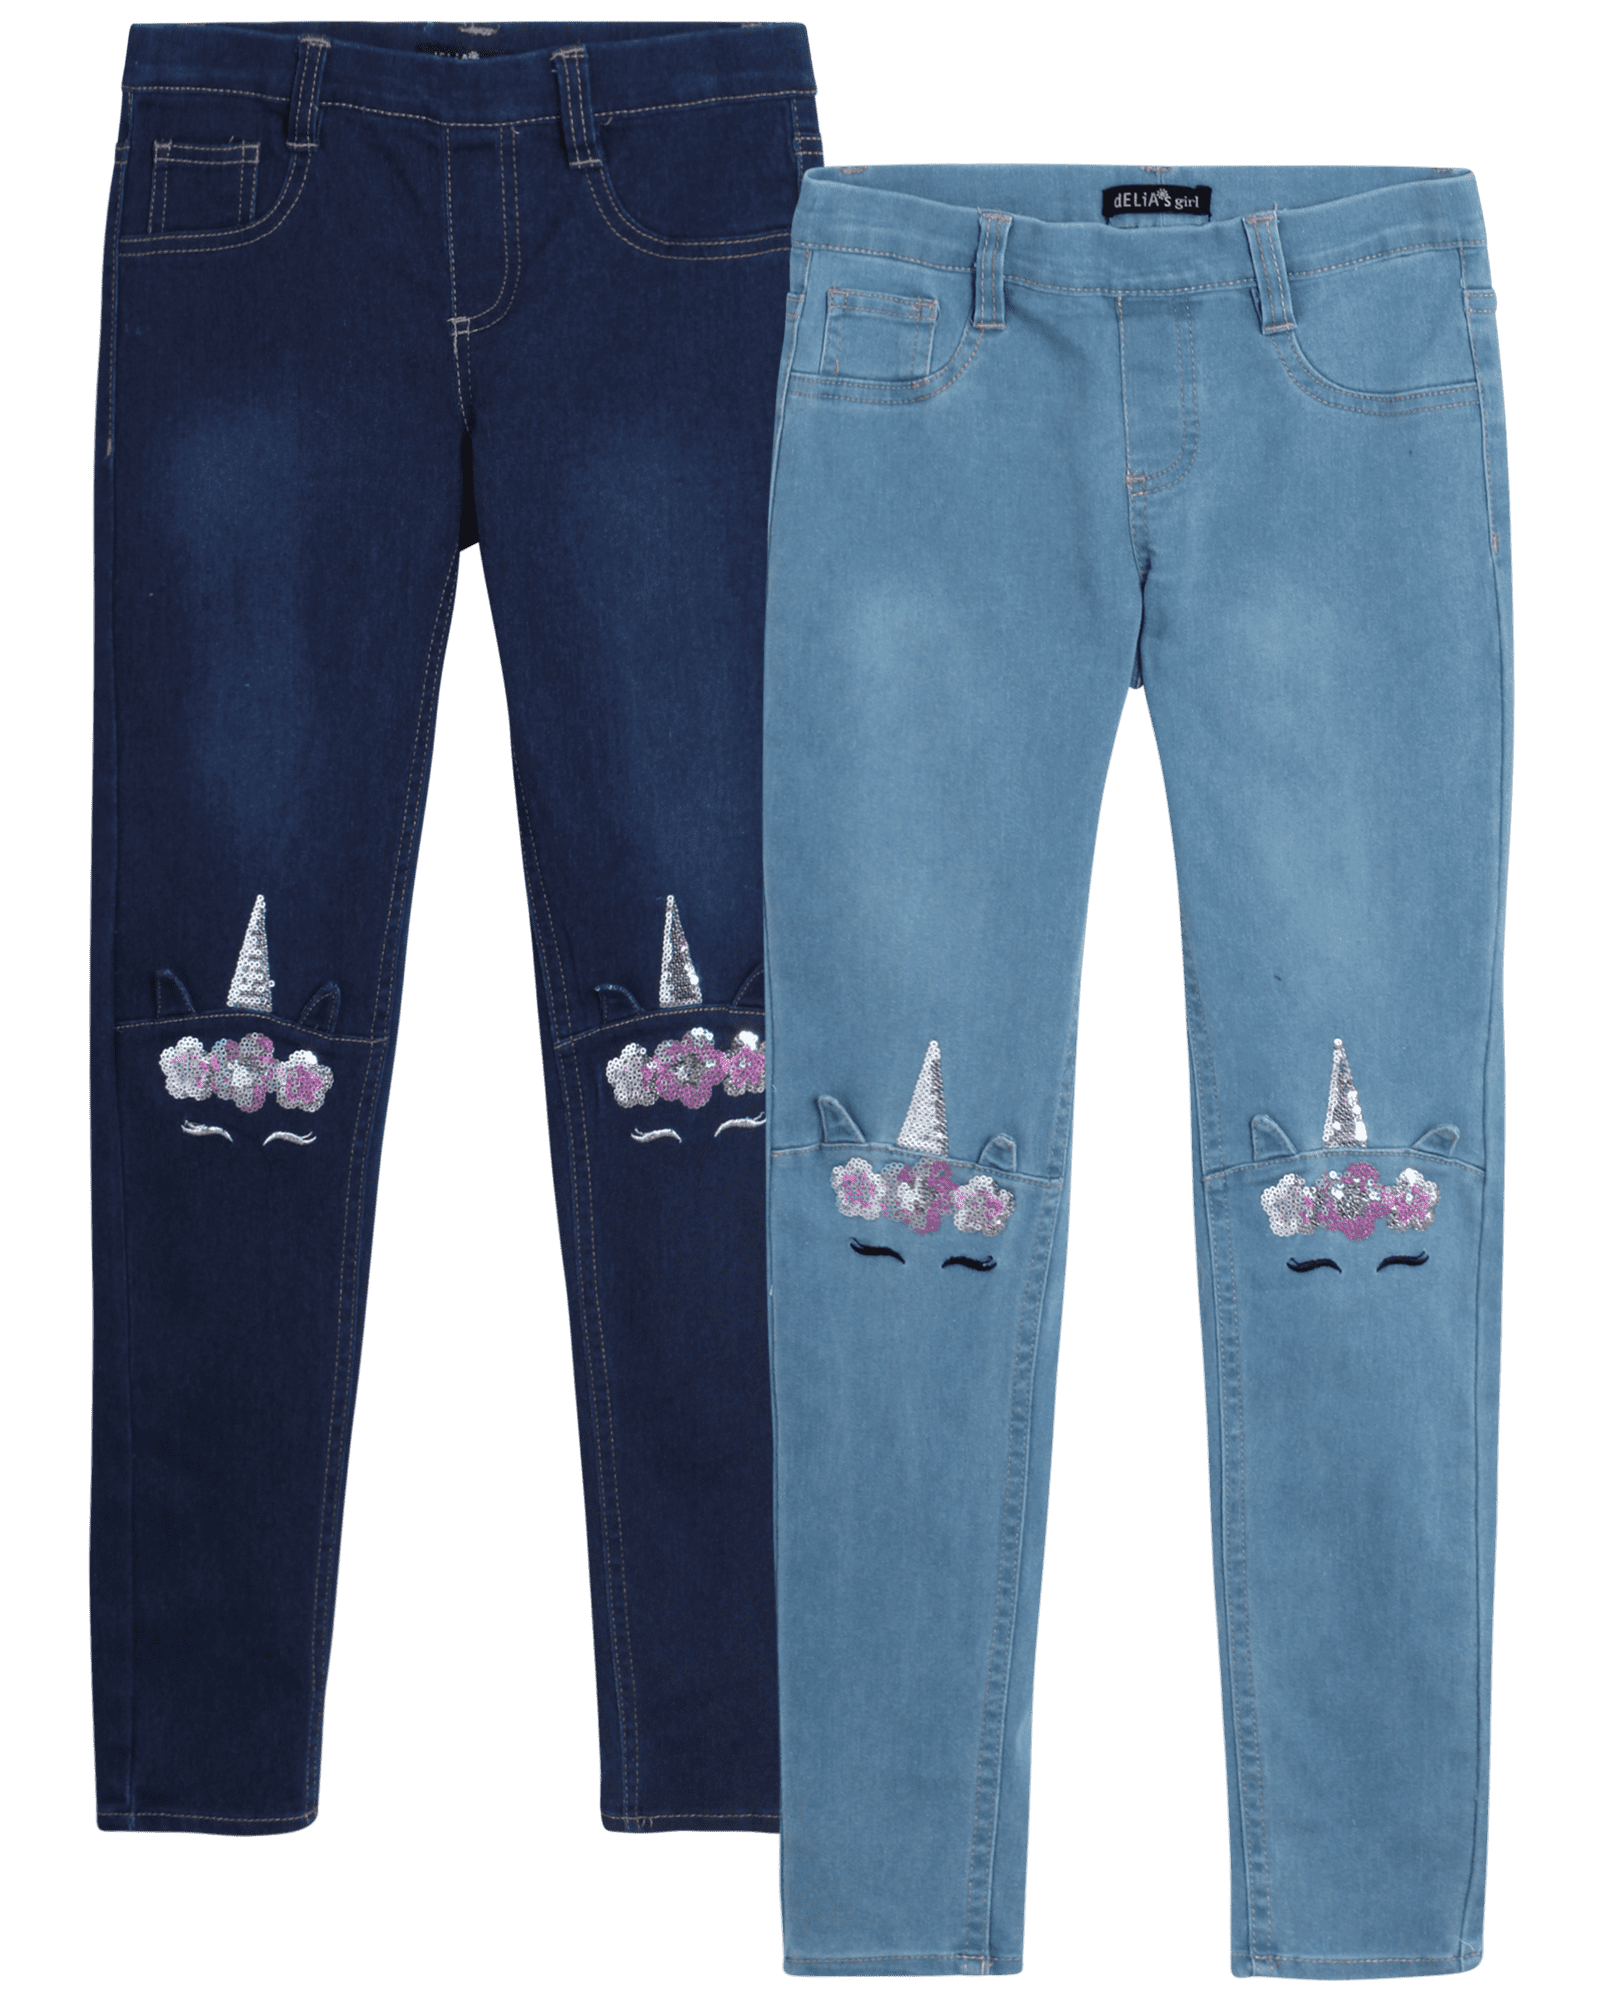 dELiA*s Girls’ Super Stretch Denim Jegging Jeans with Critter ...